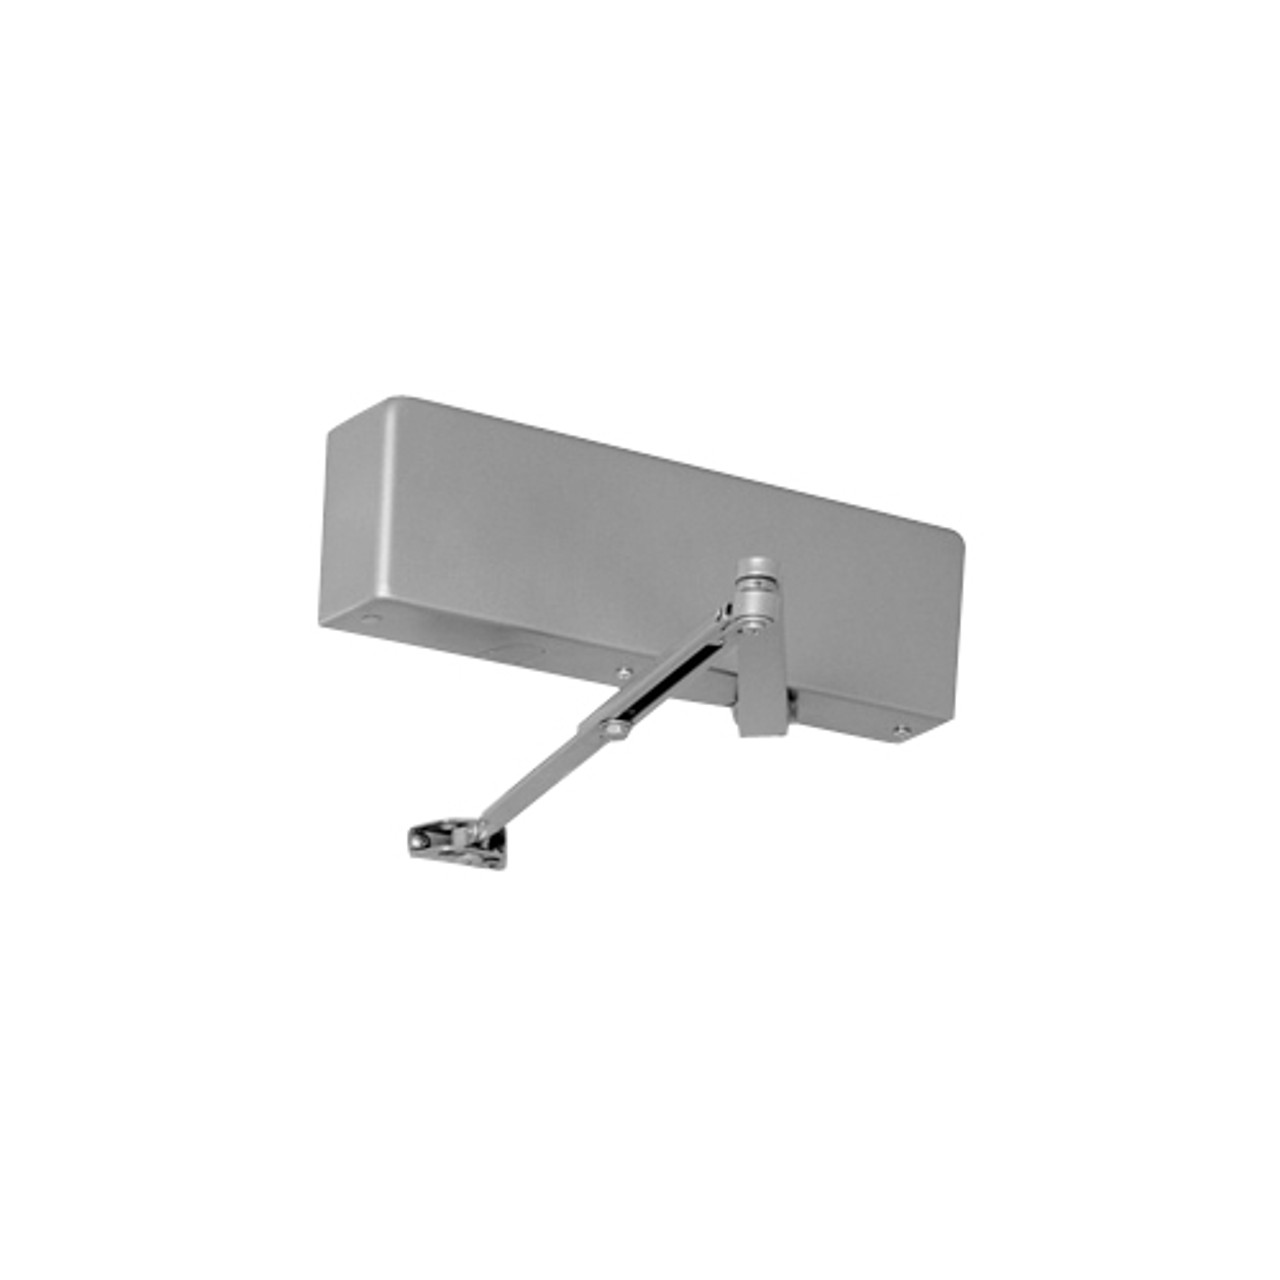 JL7500HM-689 Norton 7500 Series Hold Open Institutional Door Closer with Top Jamb Only Reveals 2-3/4 to 6-3/4 inch to 180 Degree in Aluminum Finish